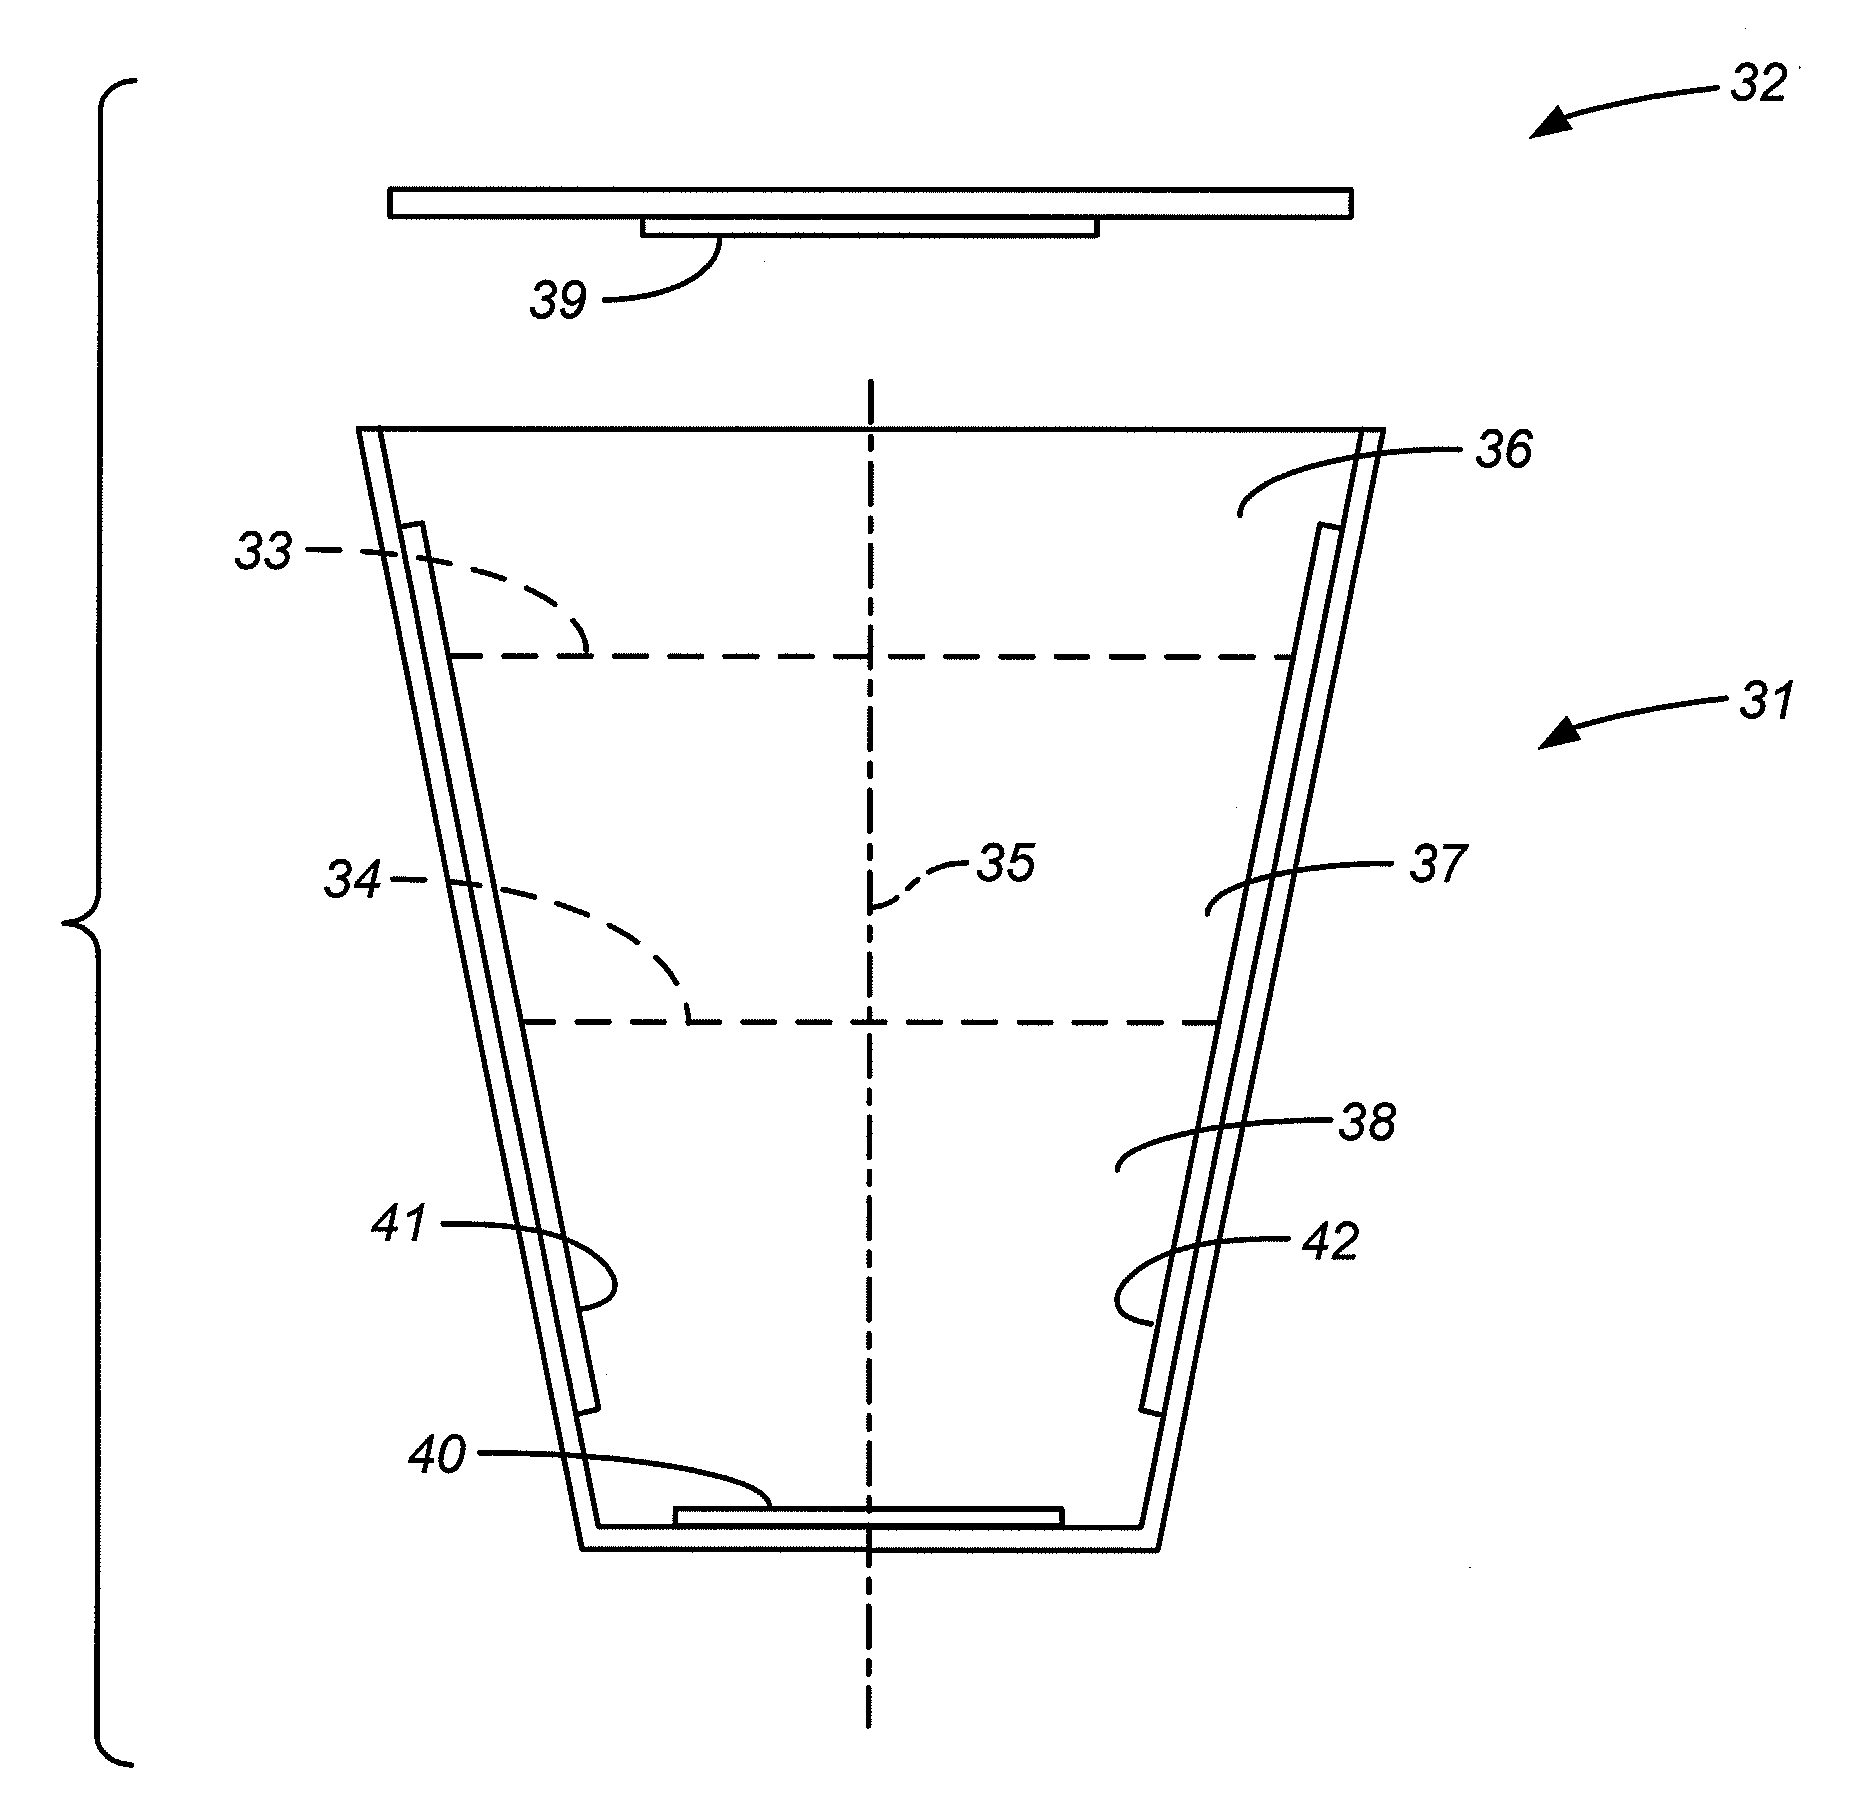 Electroporation cuvette with spatially variable electric field